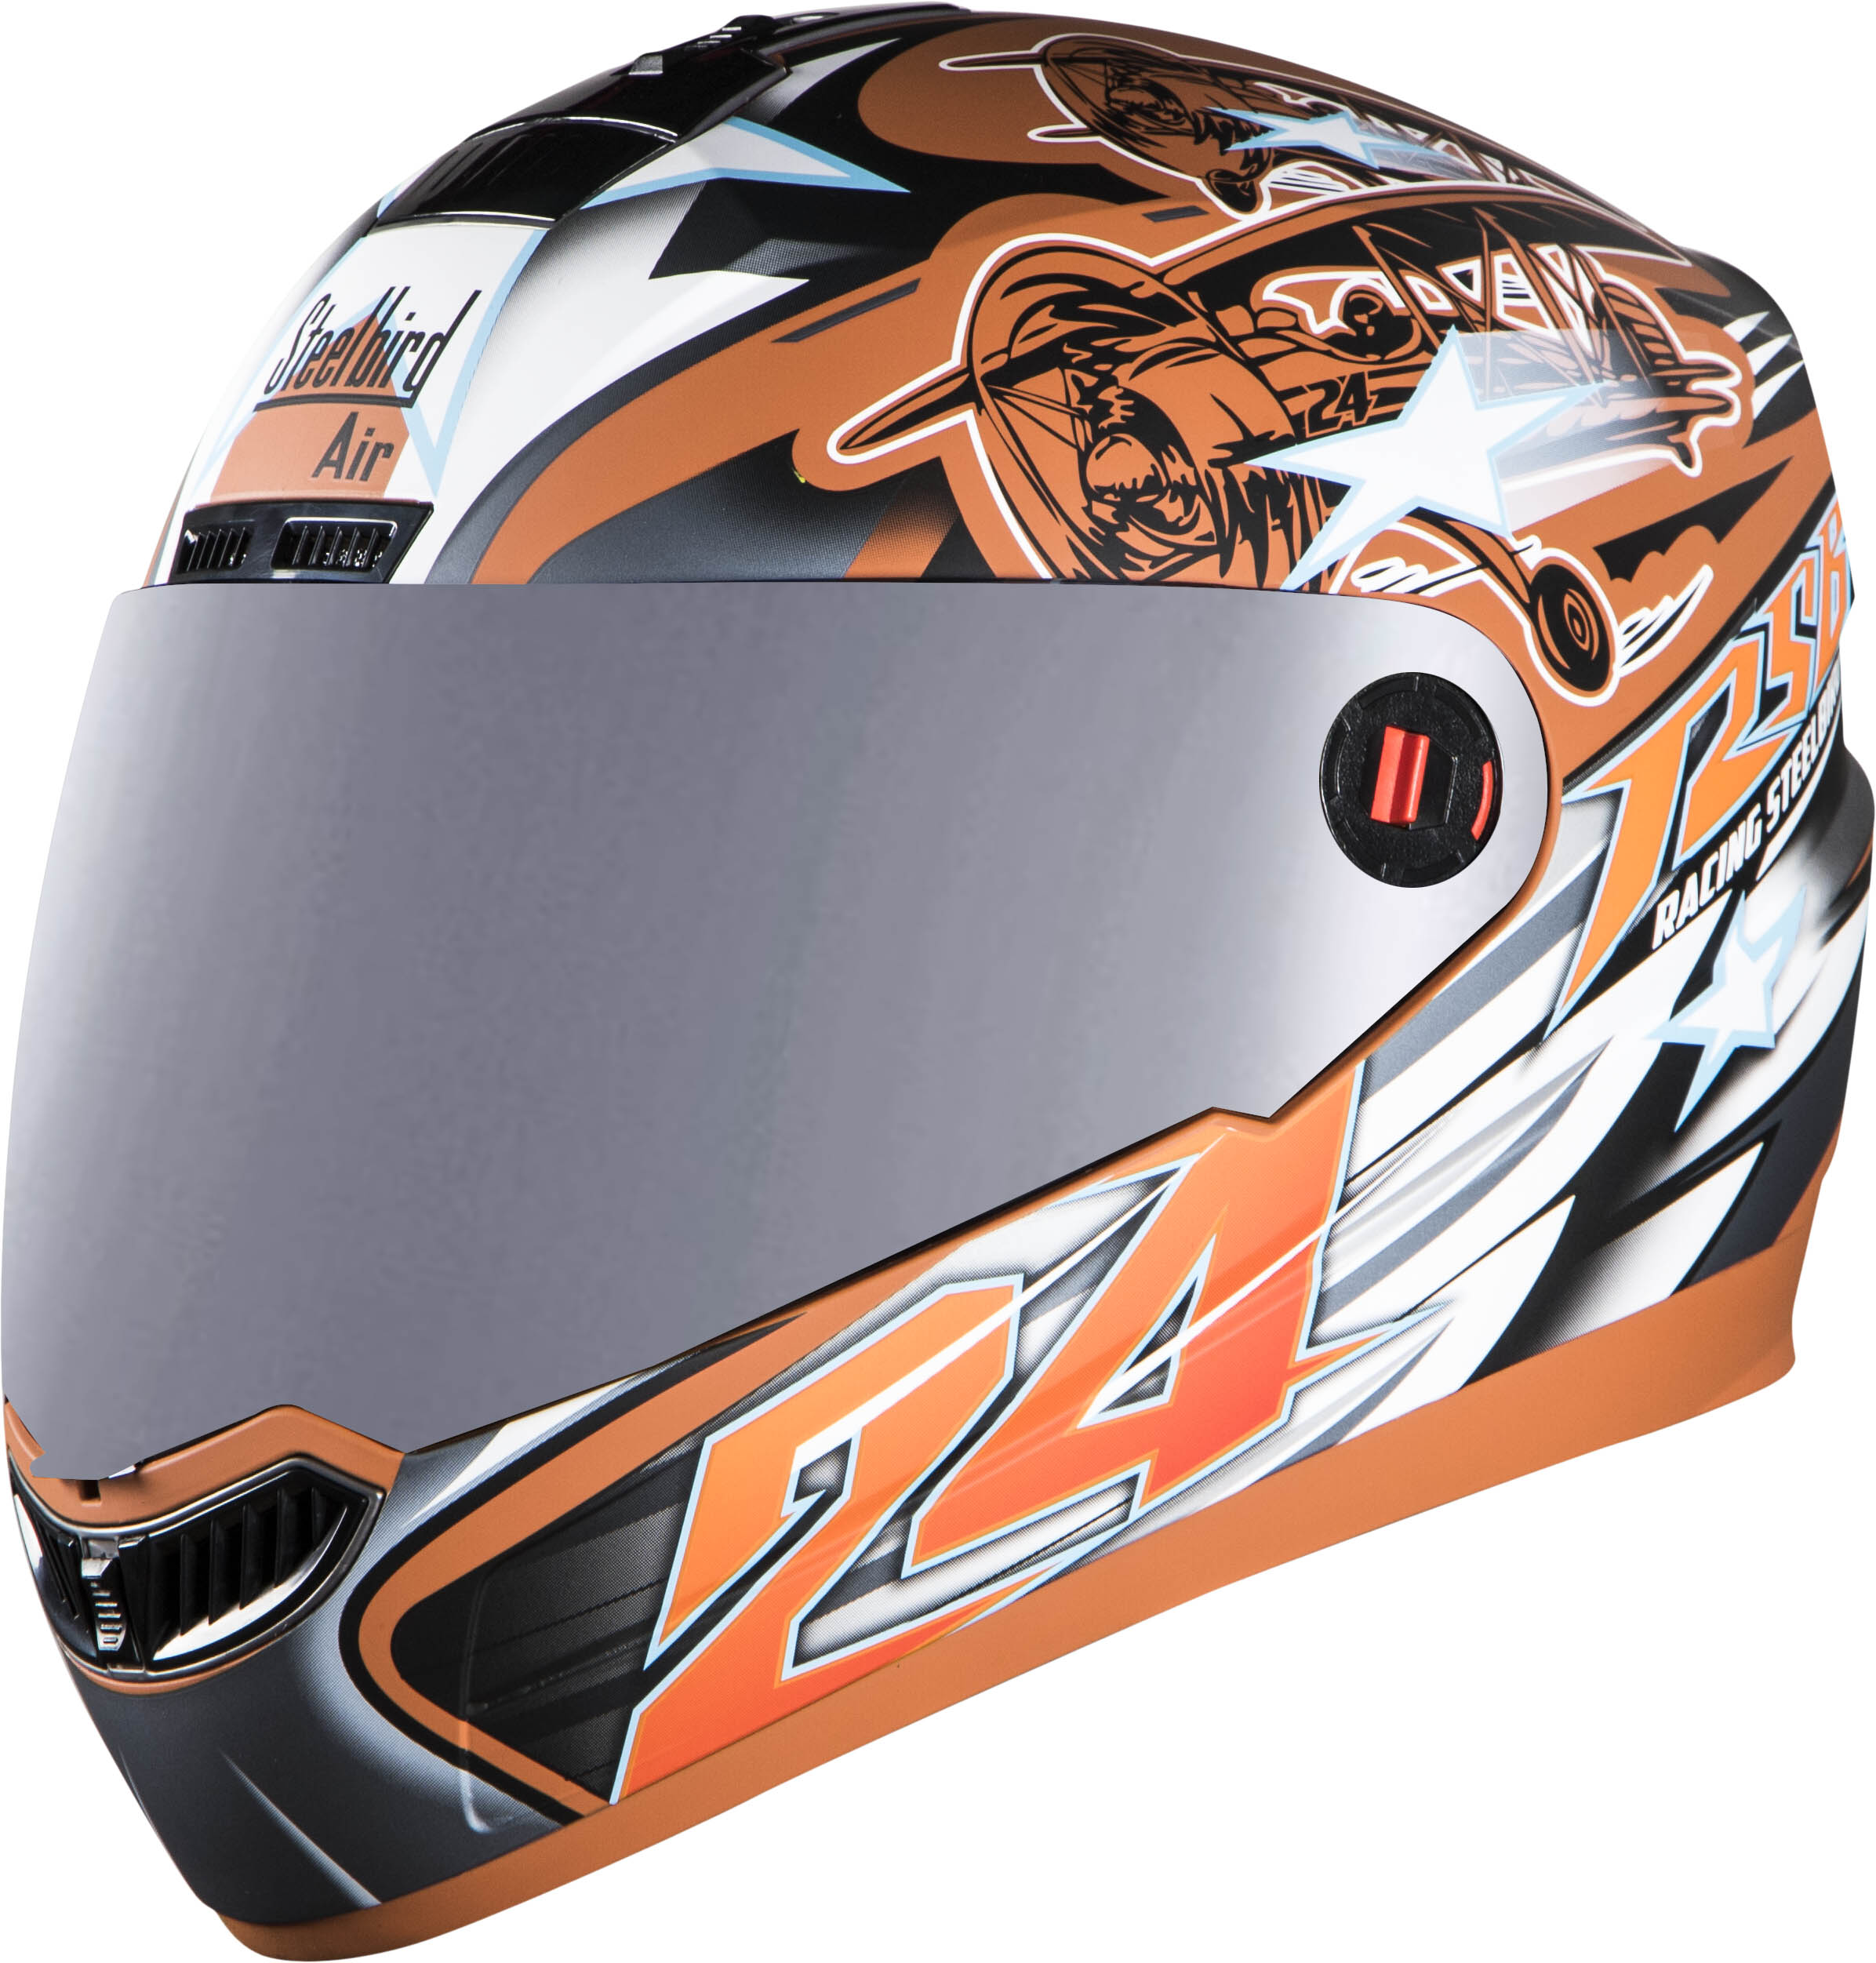 SBA-1 Hovering Glossy Orange With Orange ( Fitted With Clear Visor  Extra Silver Chrome Visor Free)